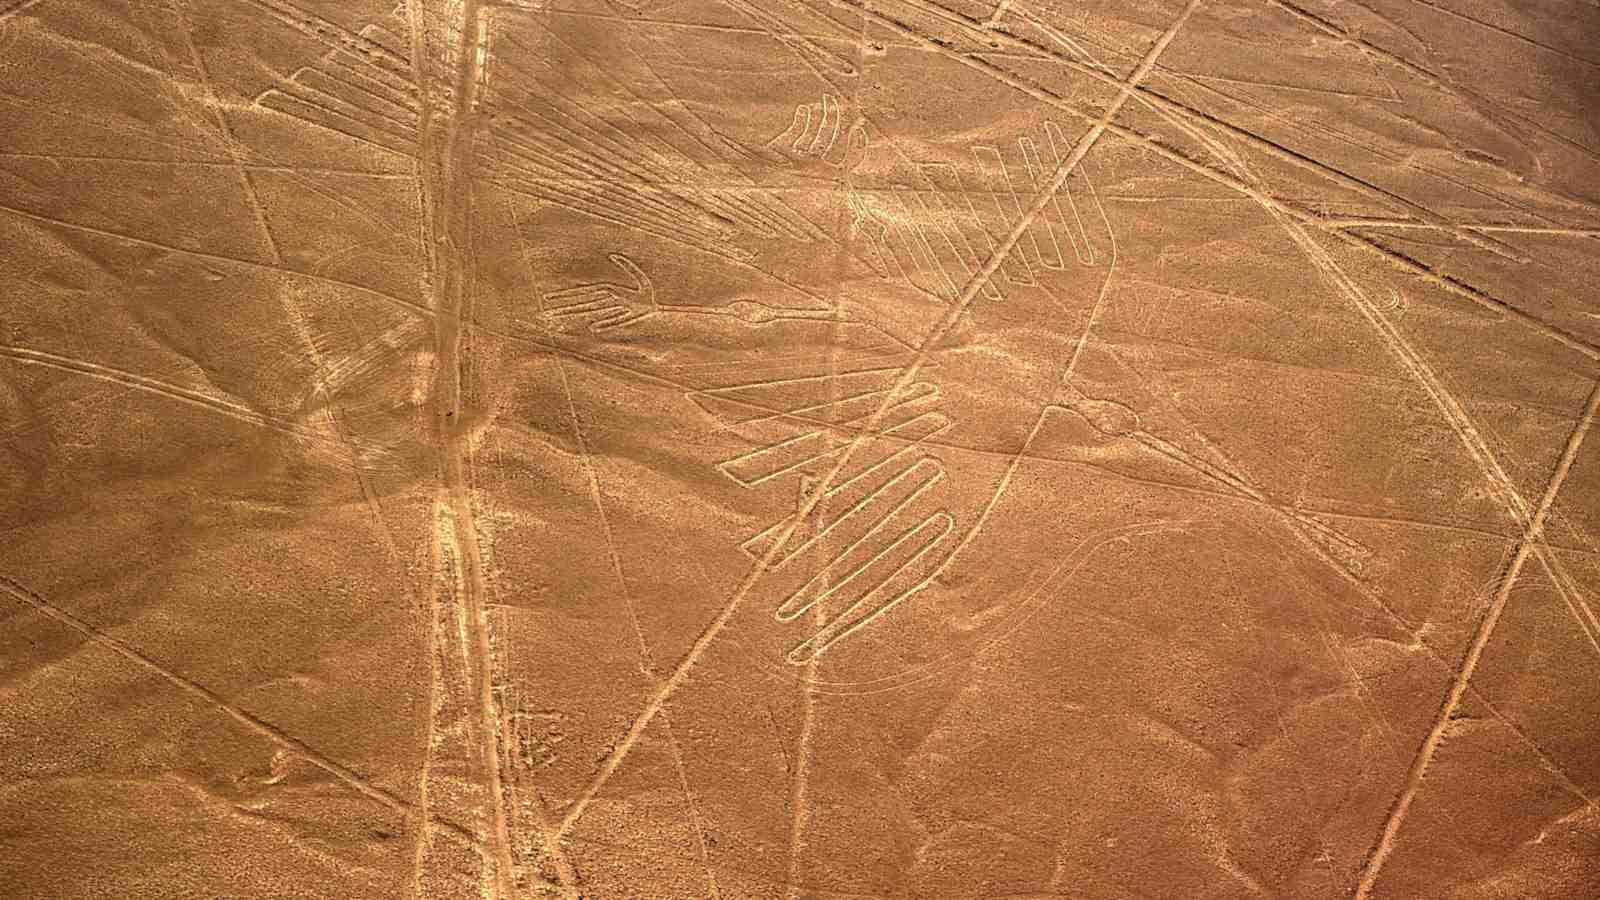 The Nazca Lines are huge drawings on the ground in the southern deserts of Peru